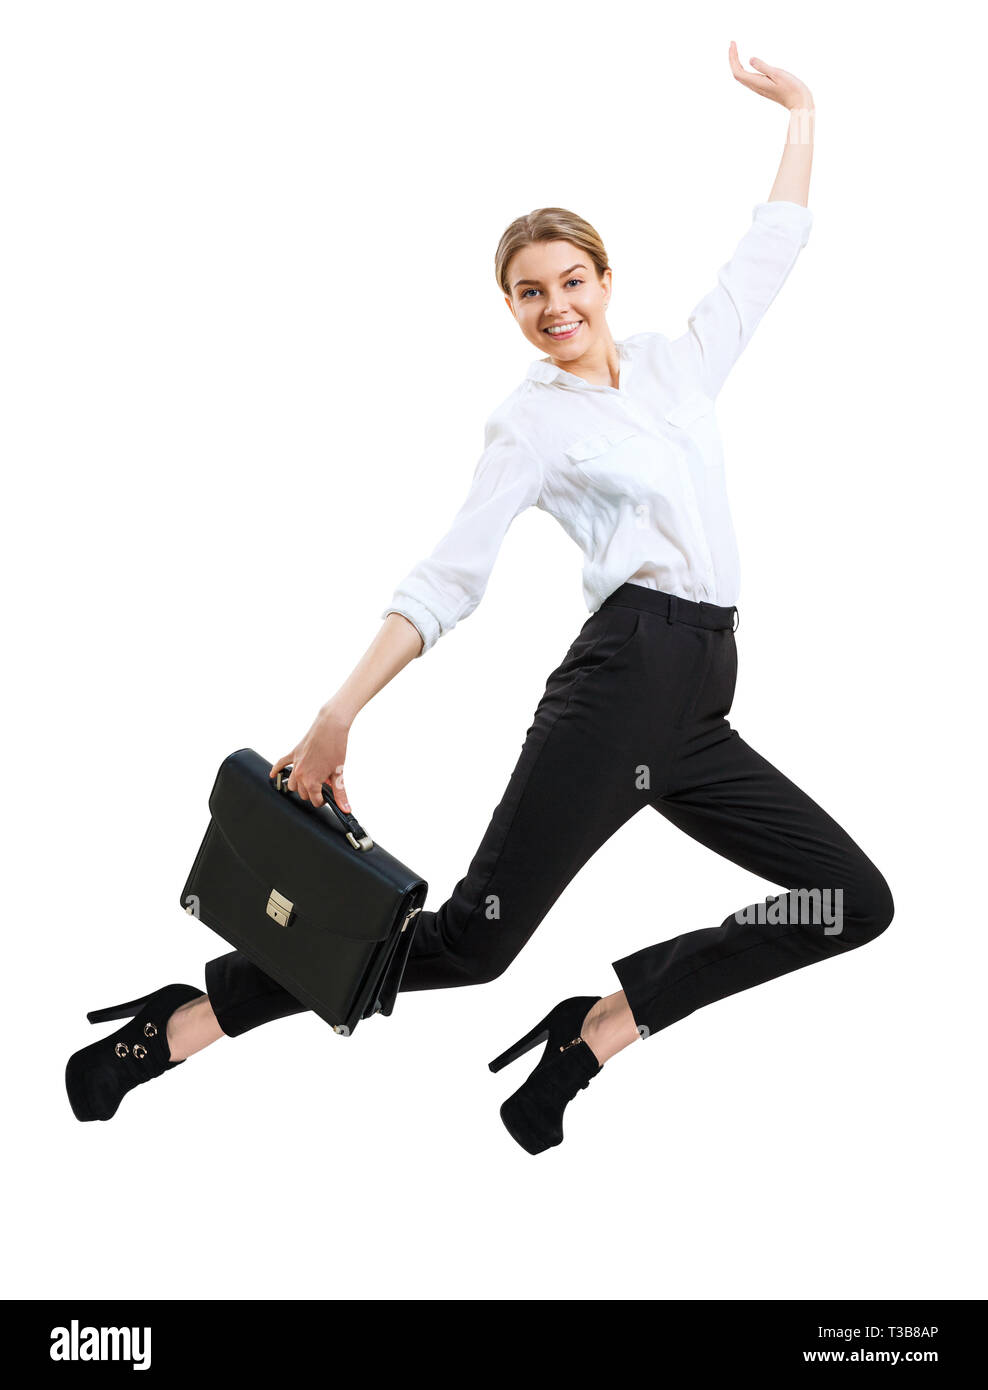 Young happy business woman jumping up in formal wear. Stock Photo